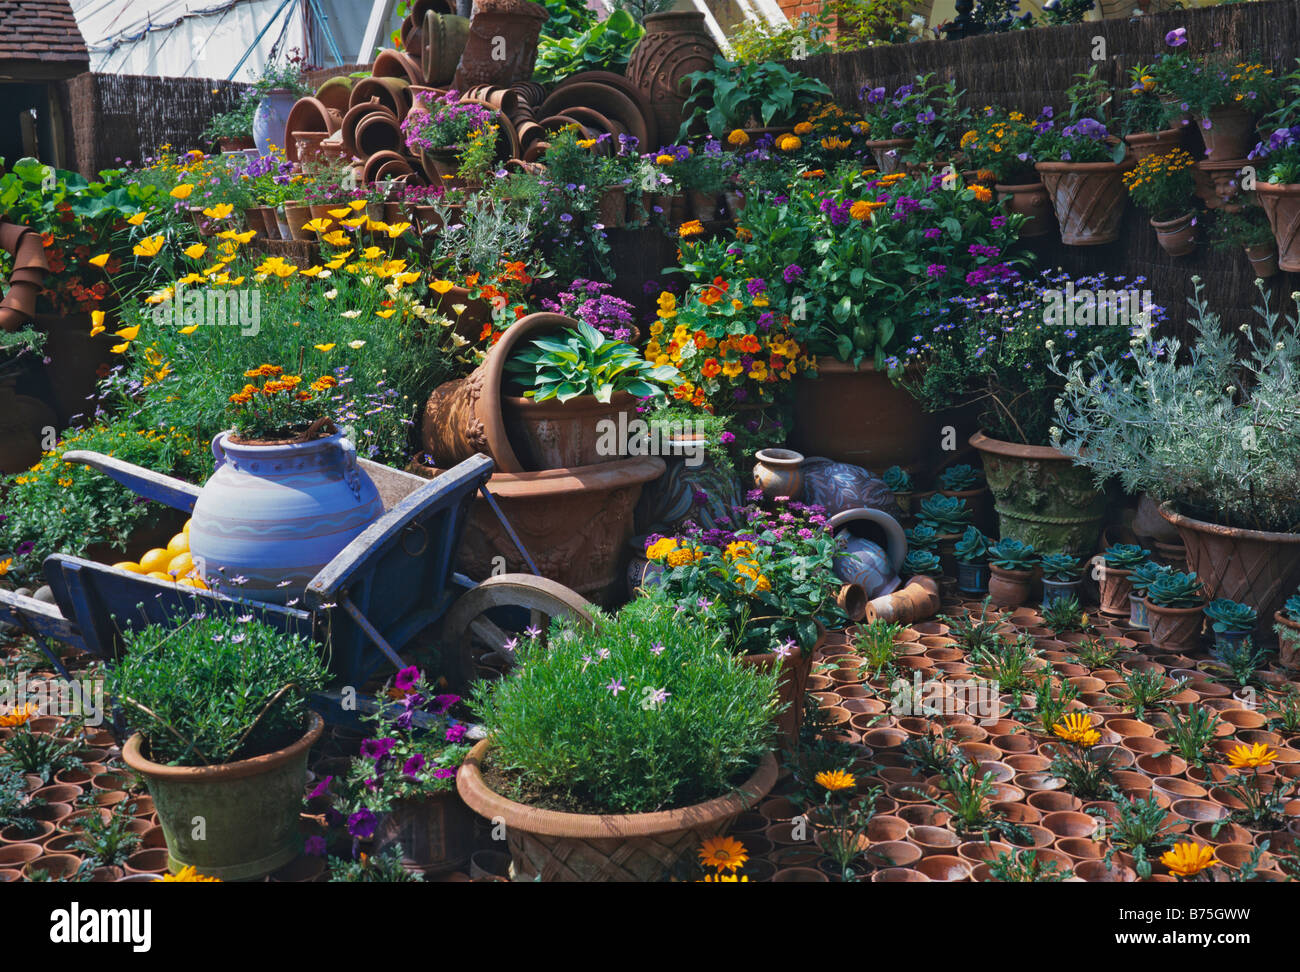 Pottery display with planted flowers and containers Stock Photo